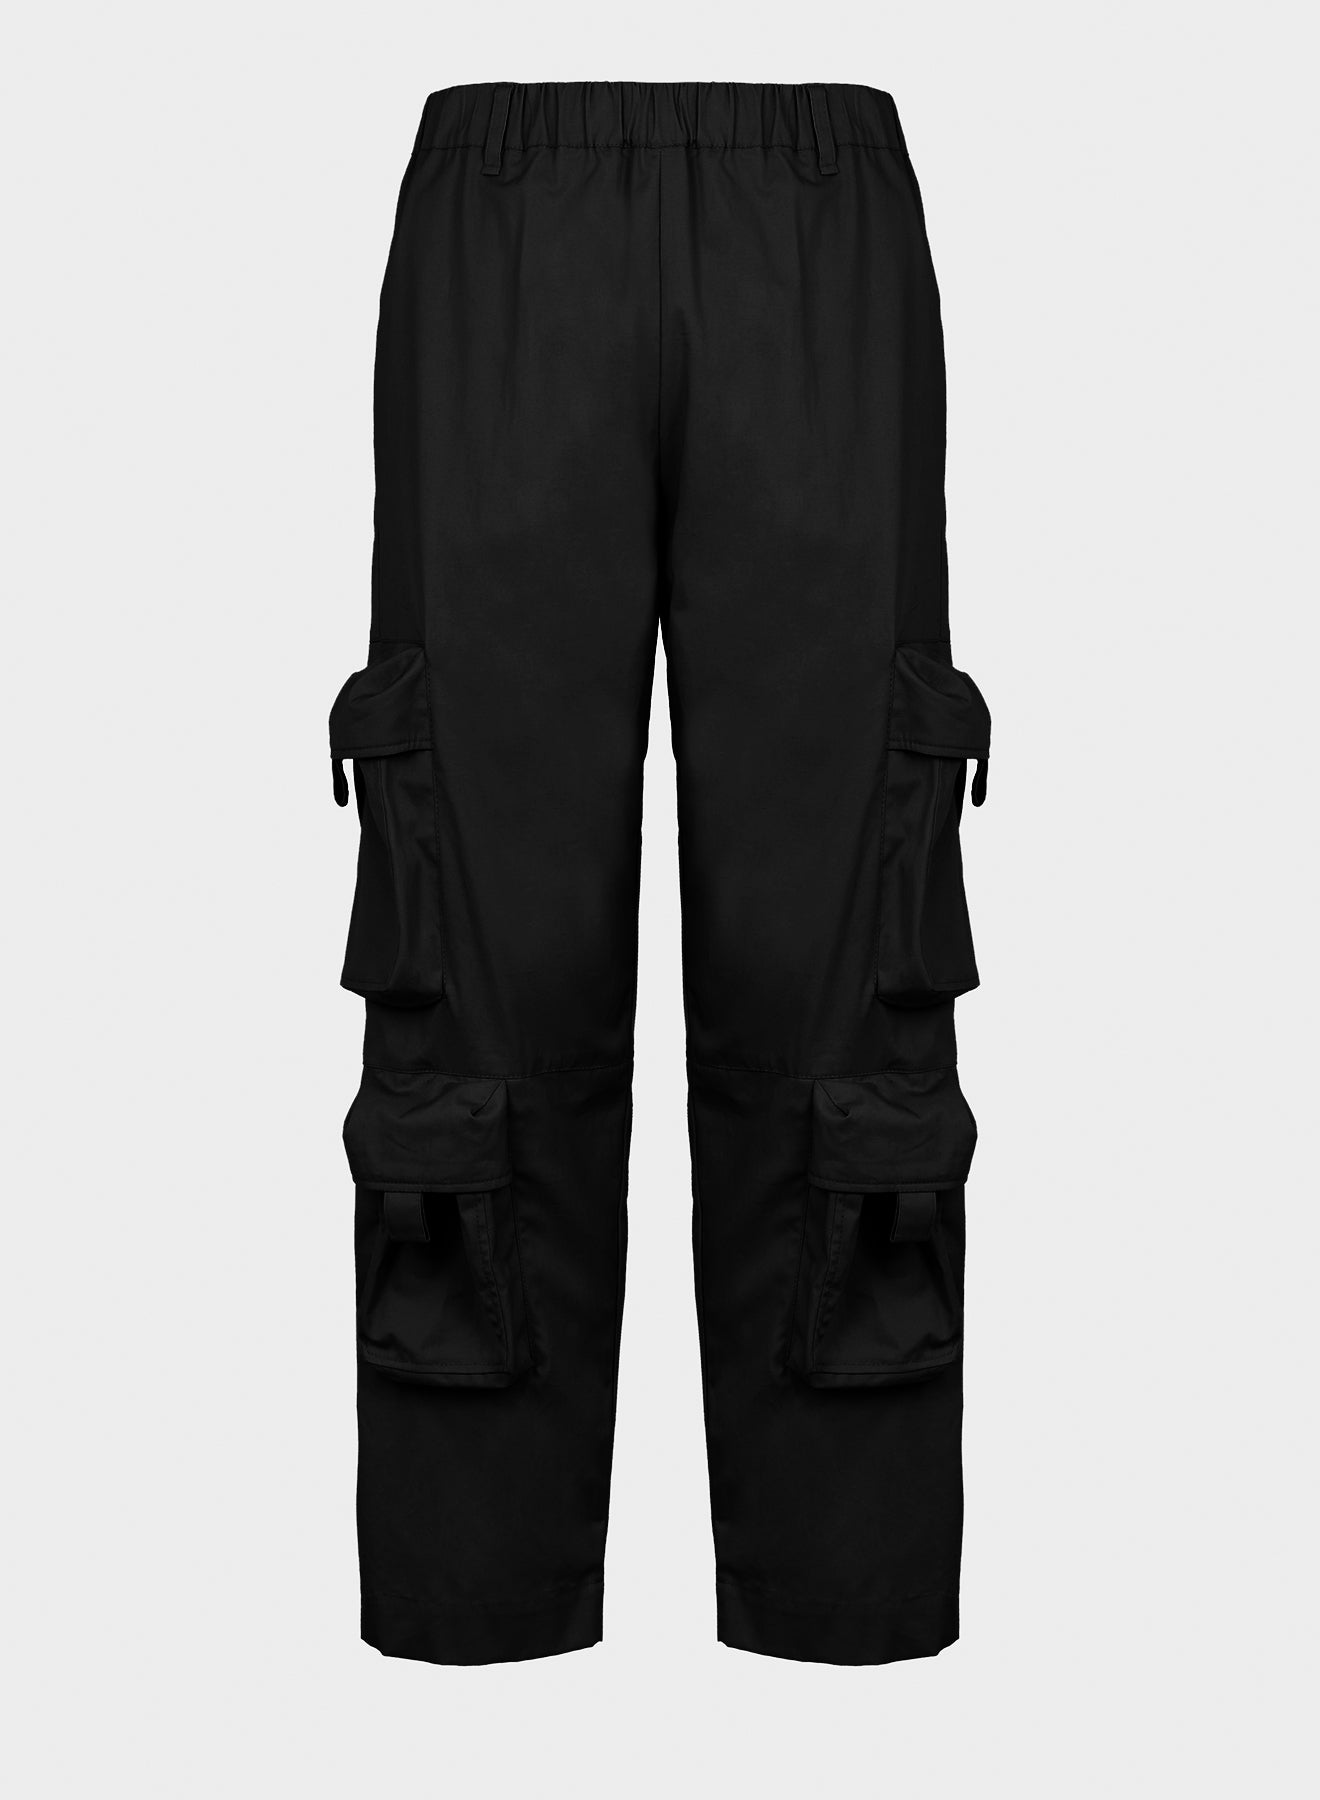 Multi-pockets coulisse cargo pants